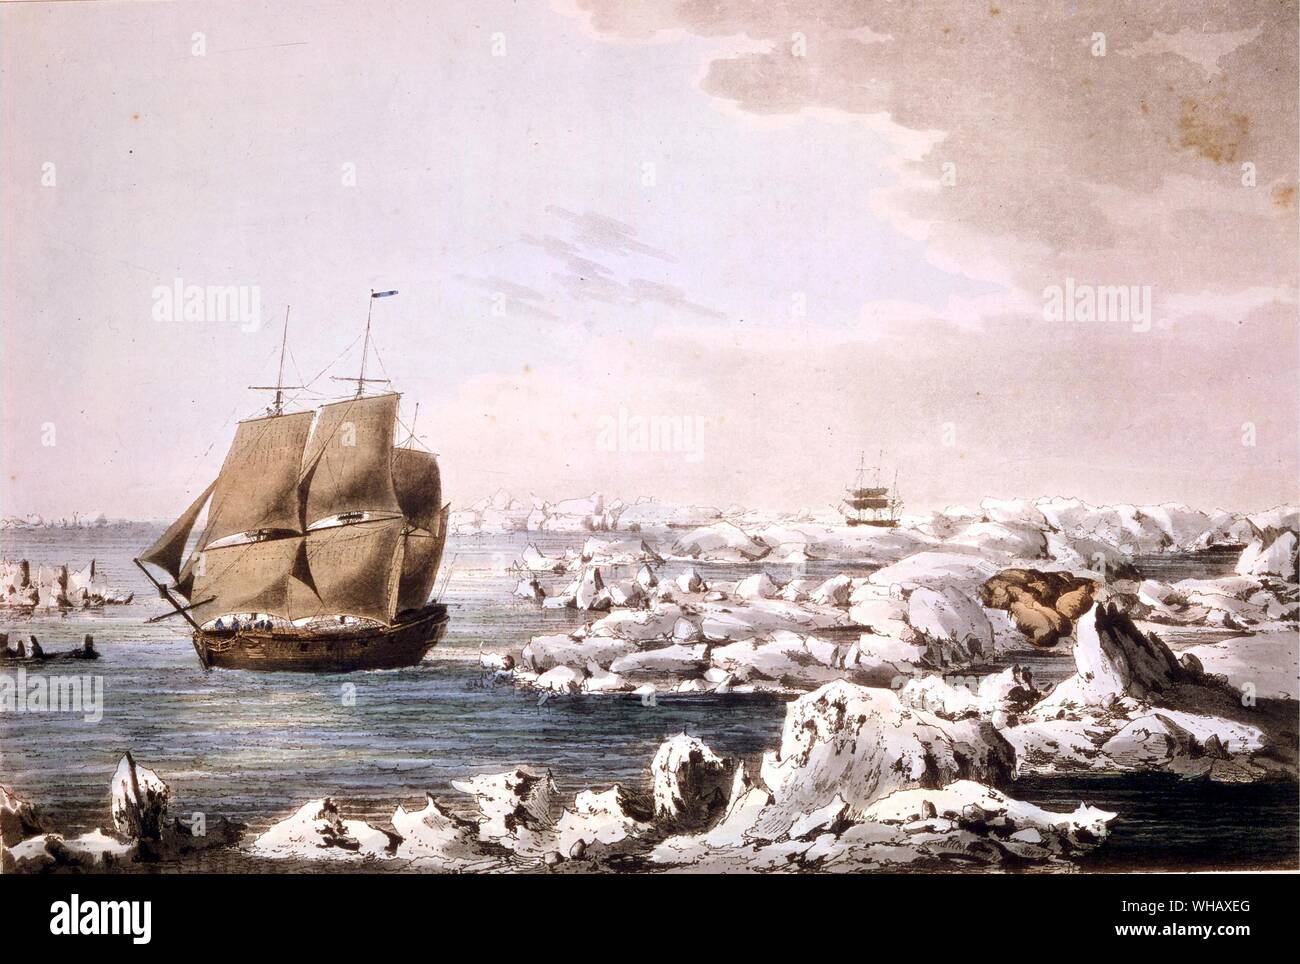 Detail of The Resolution beating through the ice, with The Discovery in the most imminent danger in the distance by John Webber, (1752-1793). Antarctica: The Last Continent by Ian Cameron, page 38.. The Resolution was responsible for some remarkable feats and was to prove one of the great ships of history. She was the first ship to cross the Antarctic Circle (17 January 1773) and crossed twice more on the voyage. The third crossing on 3 February 1774, was the deepest penetration. As a consequence the Resolution was instrumental in proving Dalrymple's Terra Australis Incognita (Southern Stock Photo